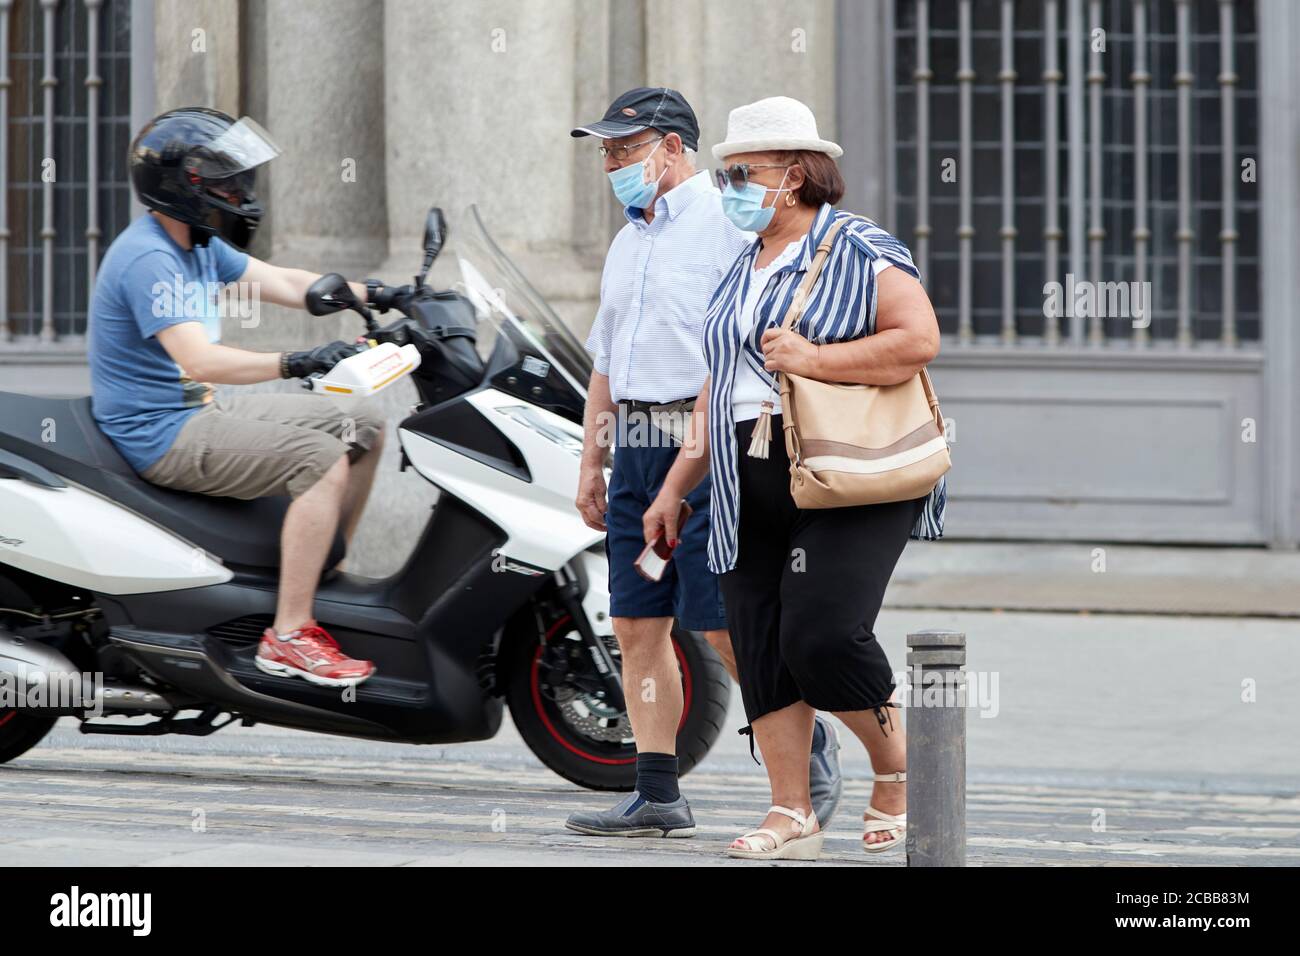 Madrid, Spain - August 8, 2020: Tourists and walkers walk through the city of in a sunset in the city of Madrid. People wear a mask to protect yoursel Stock Photo